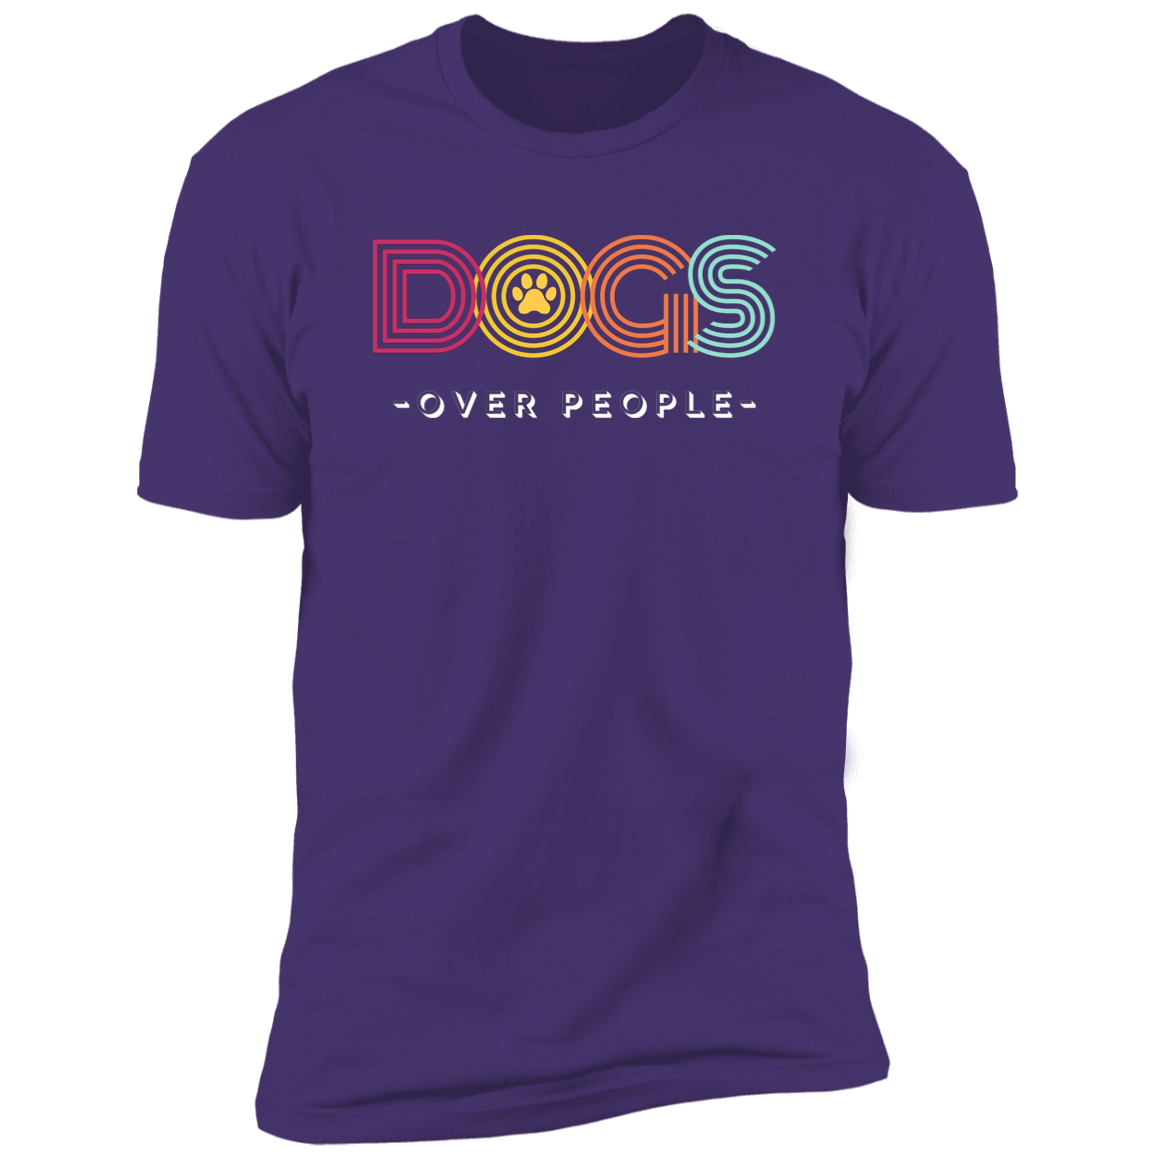 Dogs Over People t-shirt, funny dog shirt for humans, in purple rush